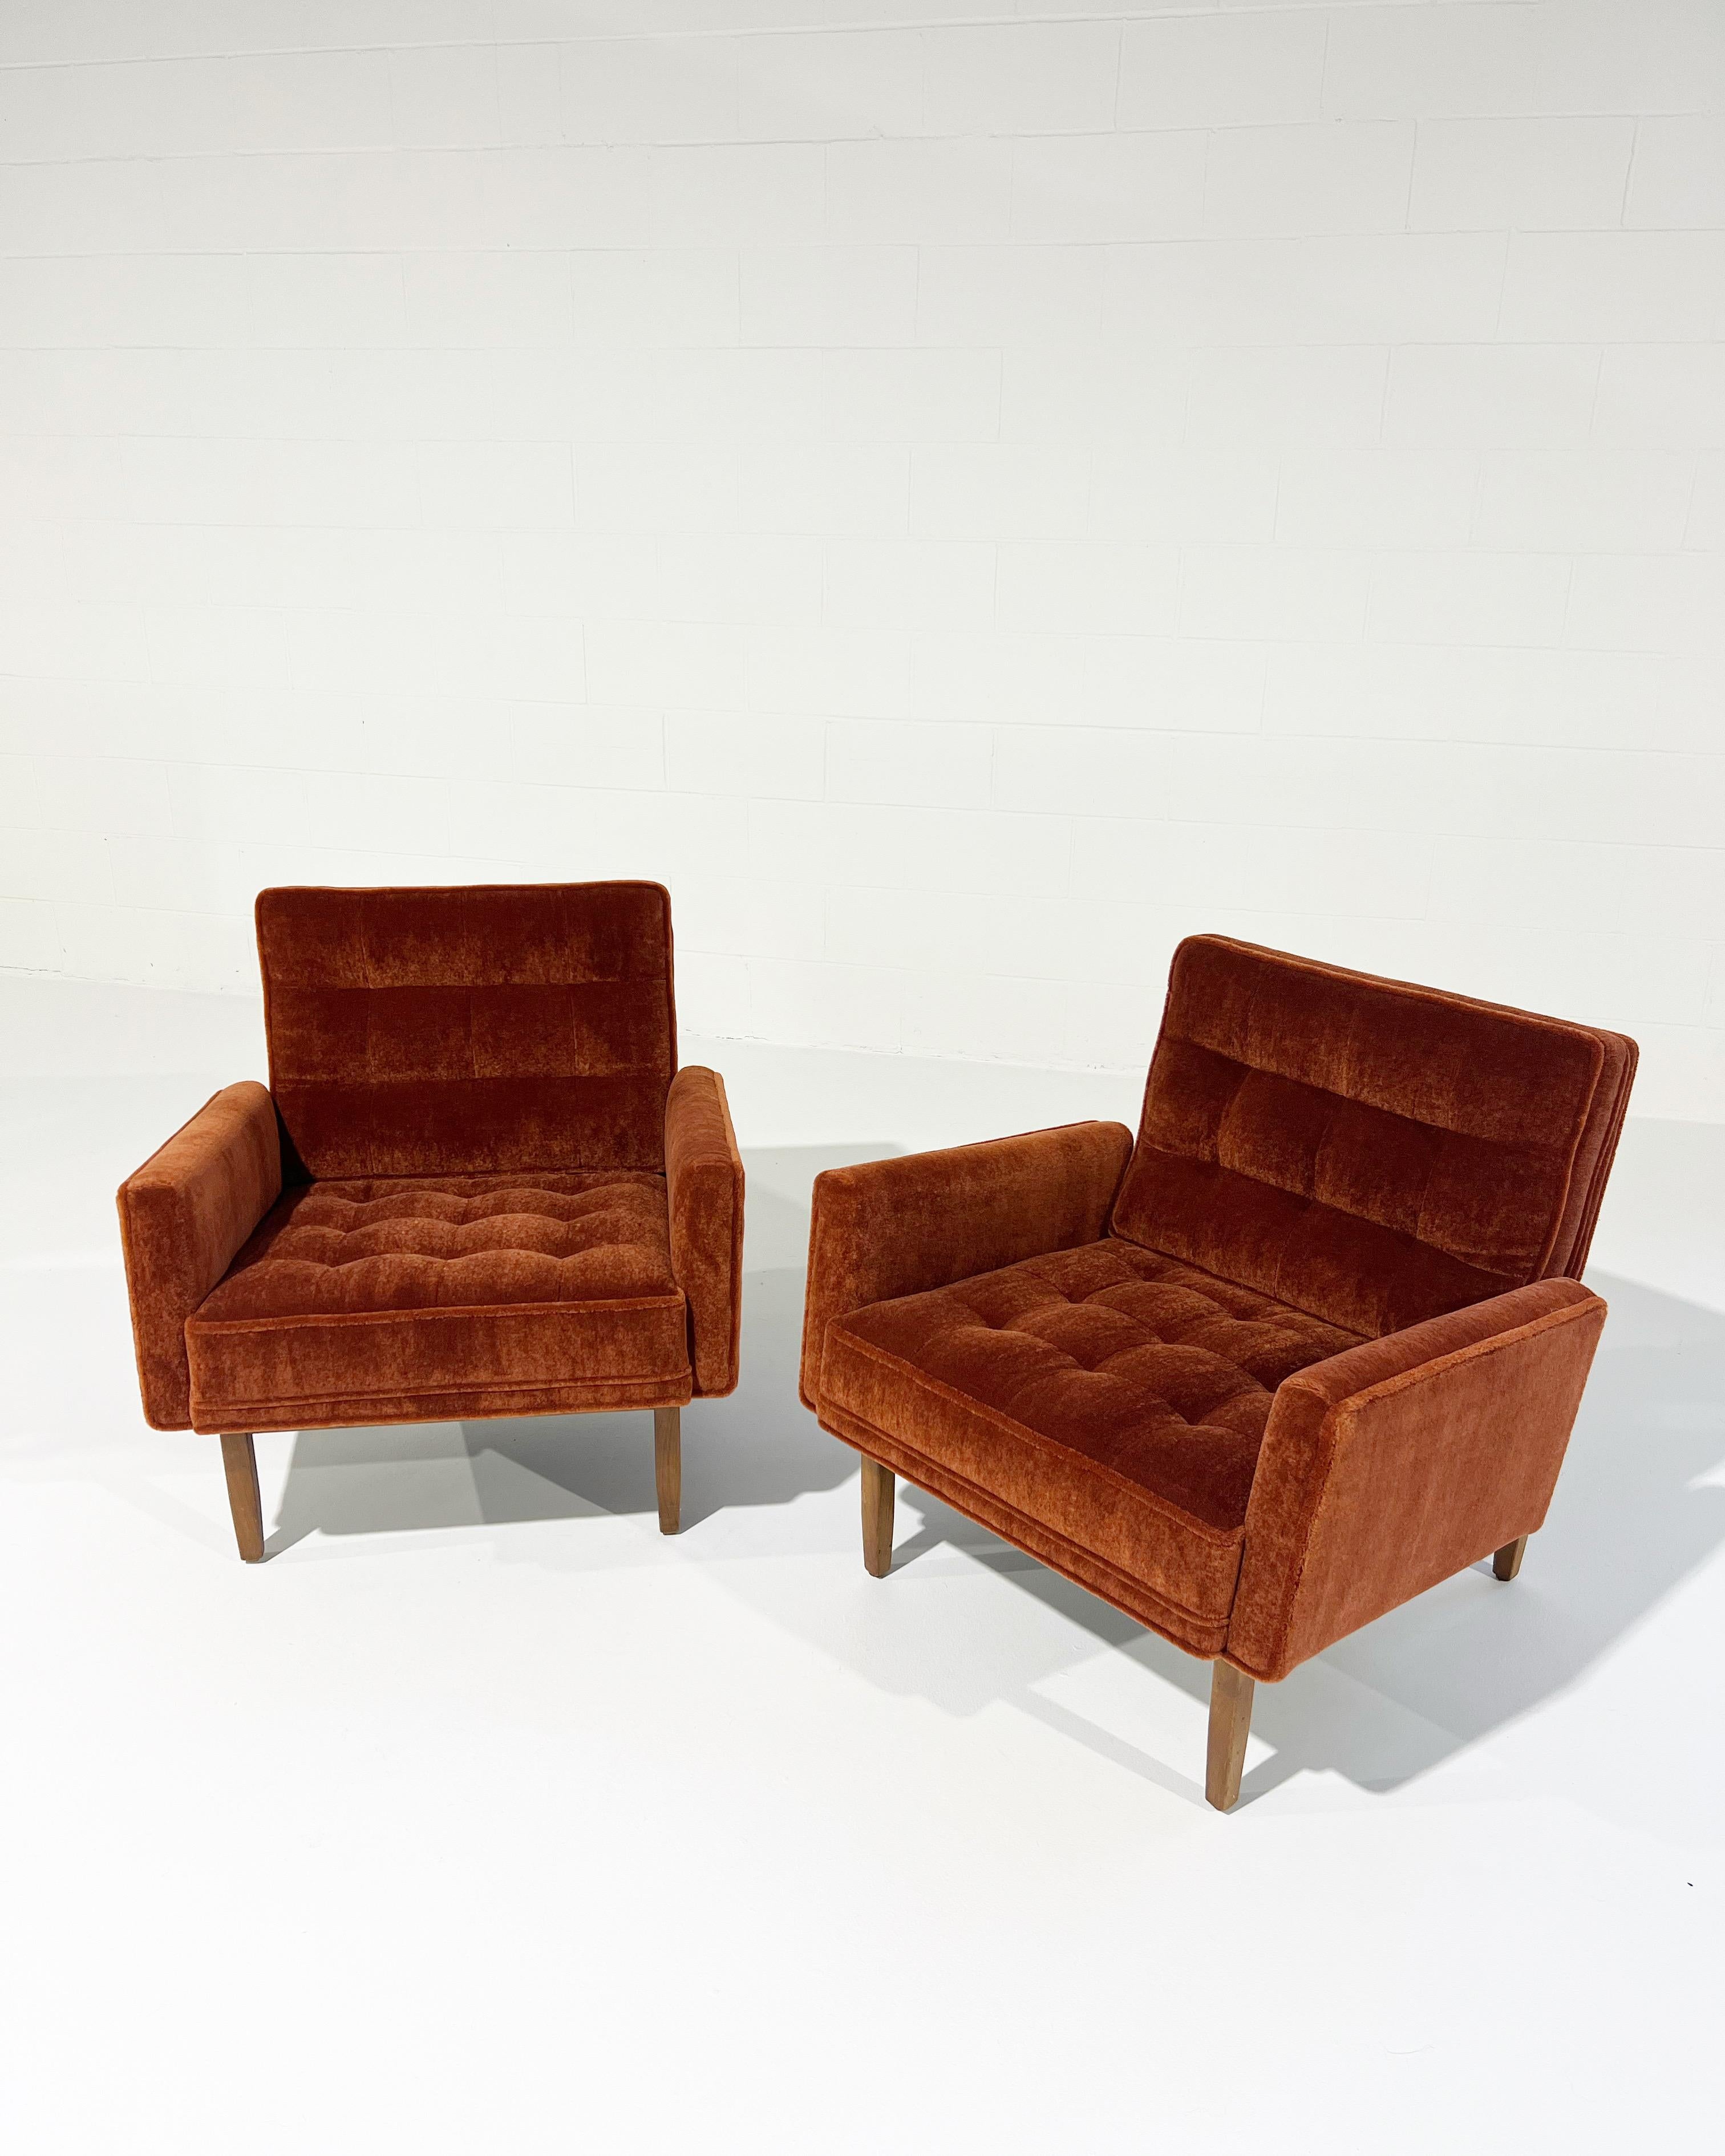 Vintage Restored Florence Knoll Armchairs in Pierre Frey Teddy Mohair For Sale 5